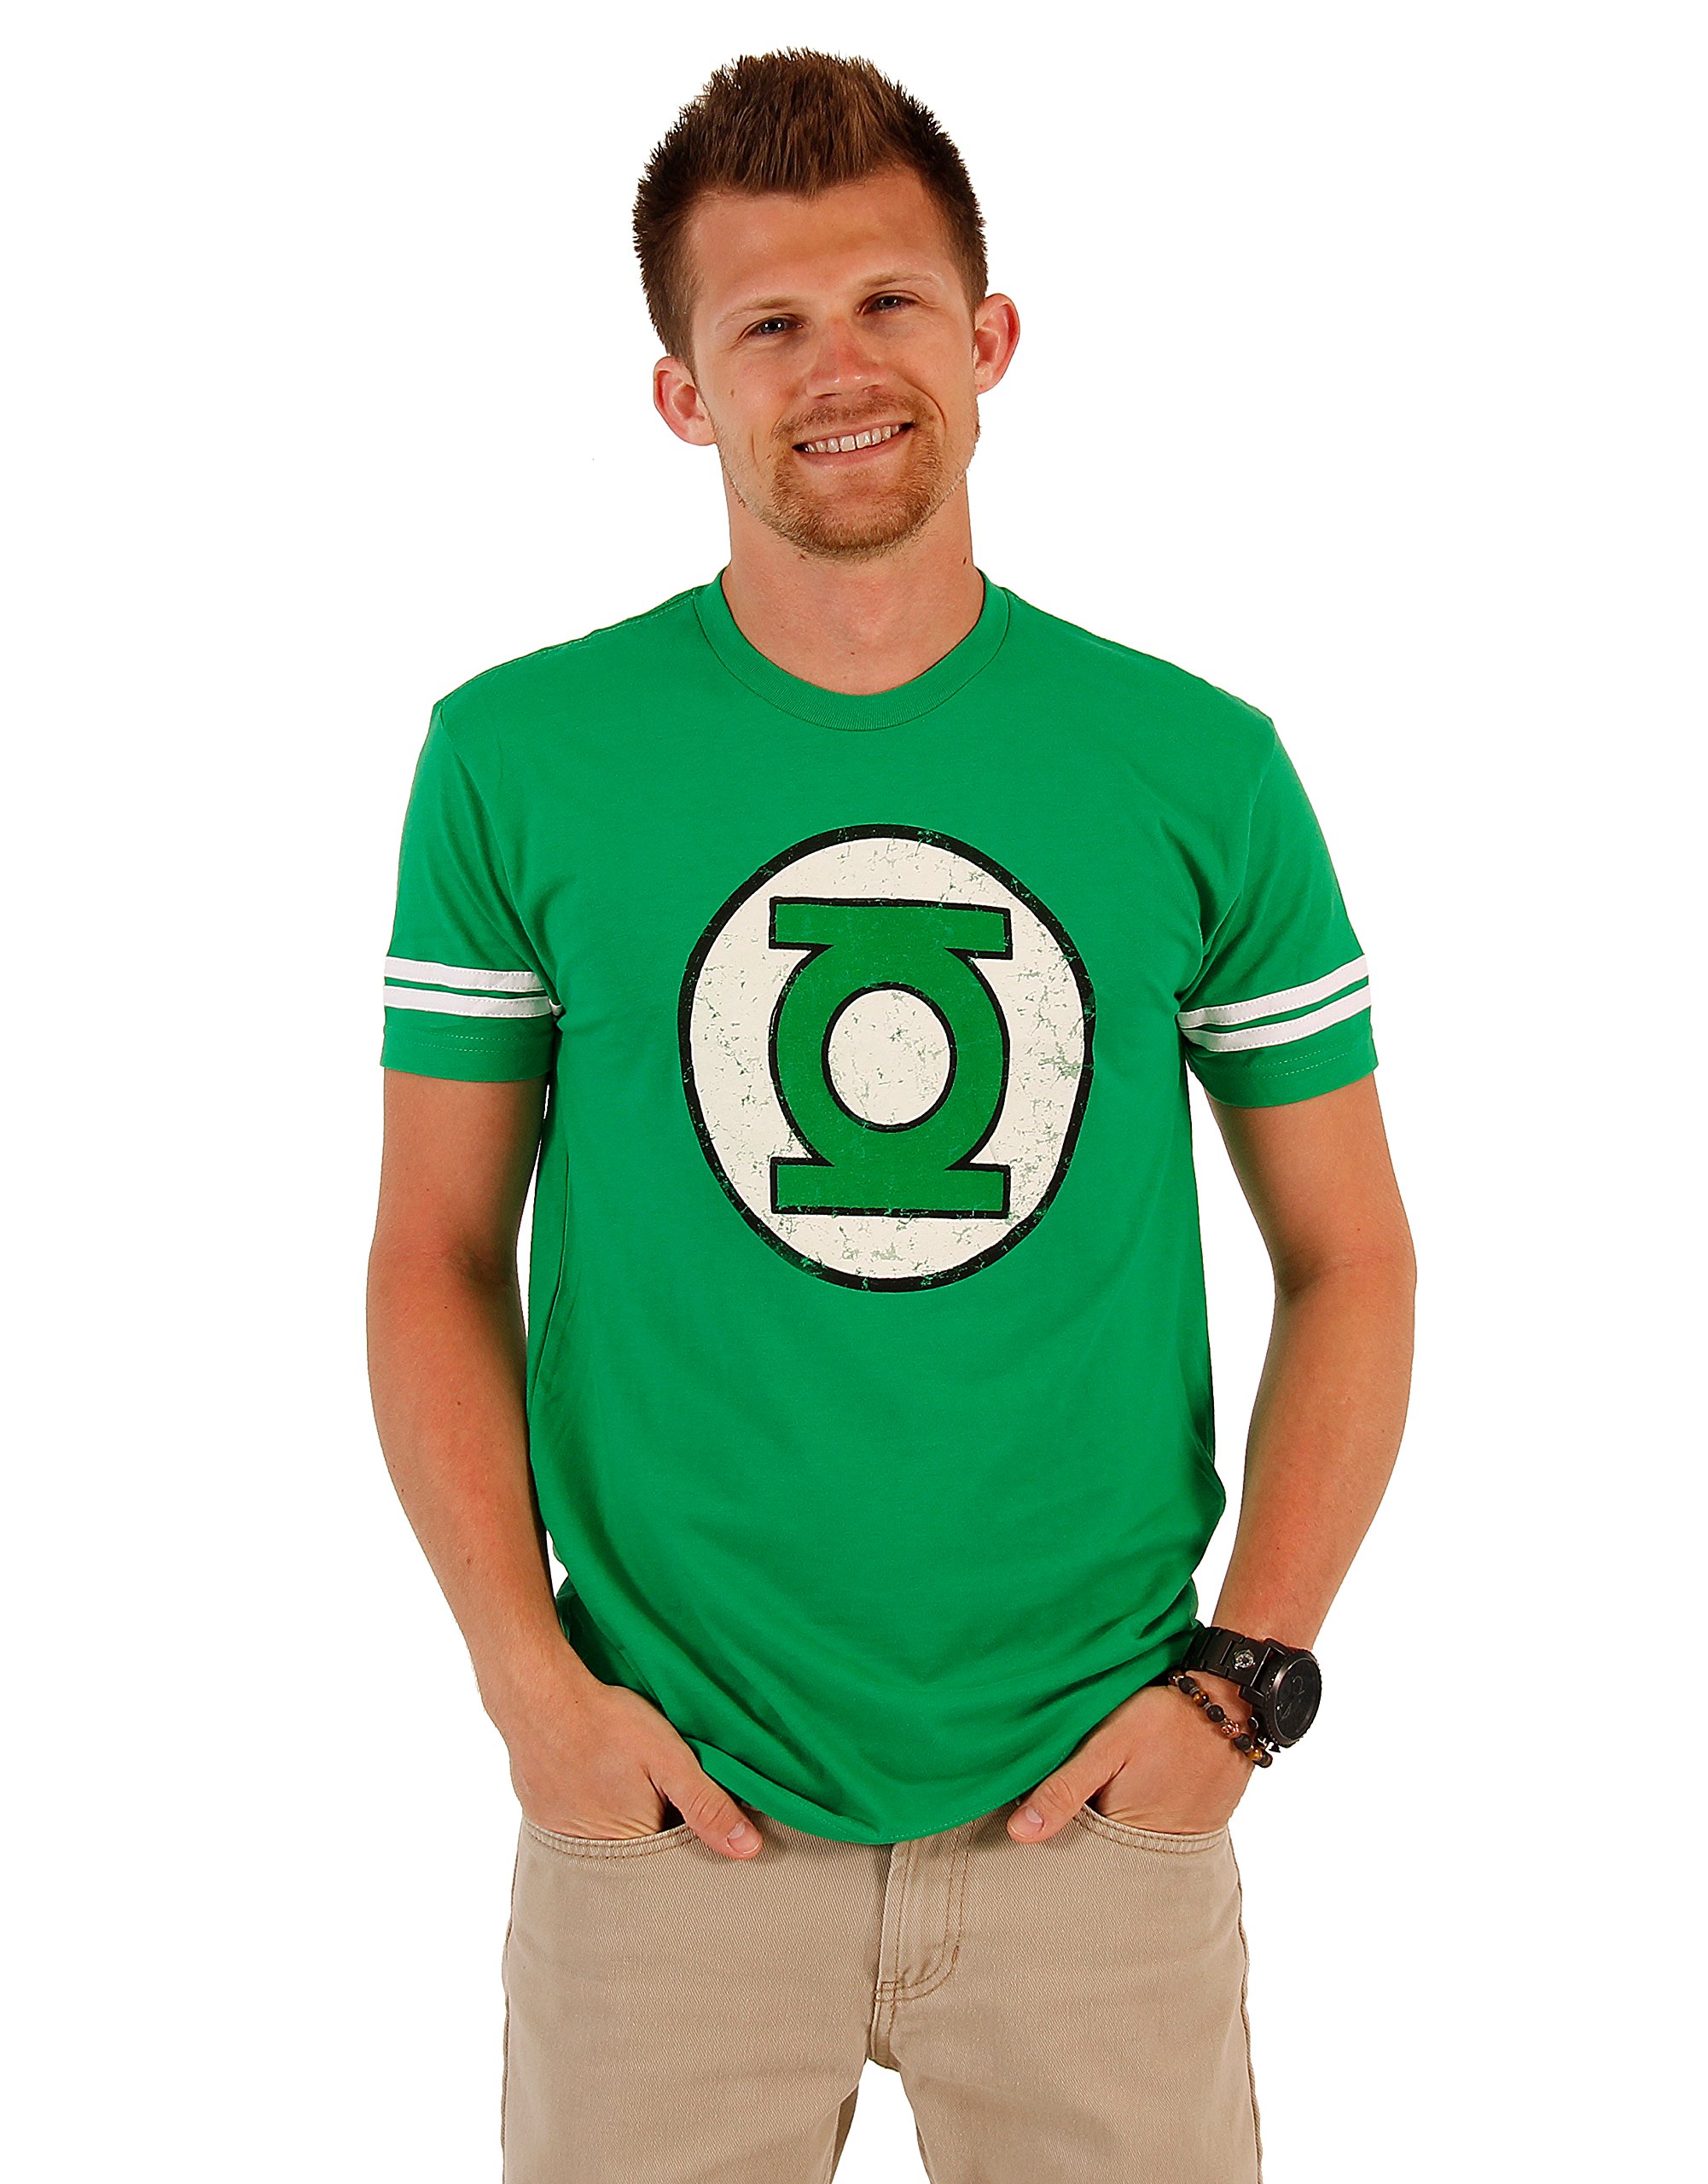 The Green Lantern DISTRESSED Logo With Striped Sleeves Kelly Green Adult T-shirt Tee